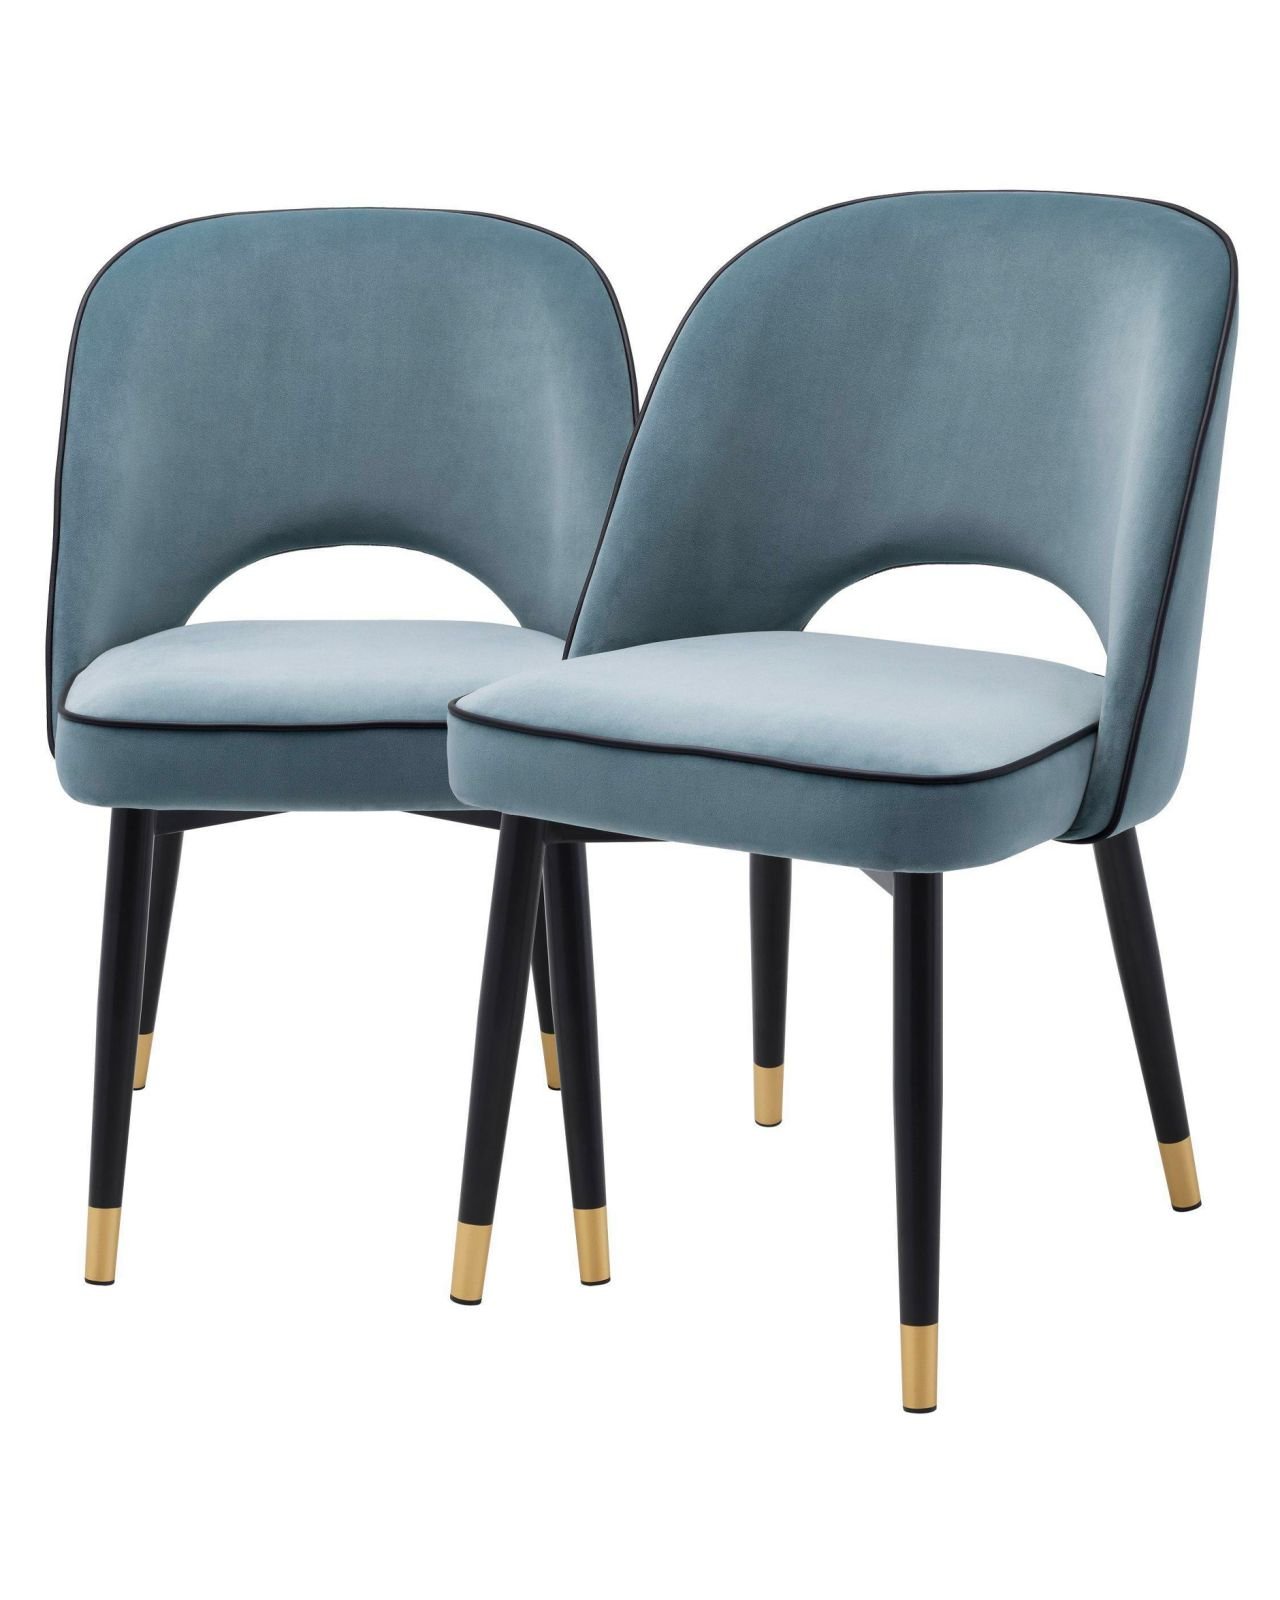 Cliff dining chairs blue